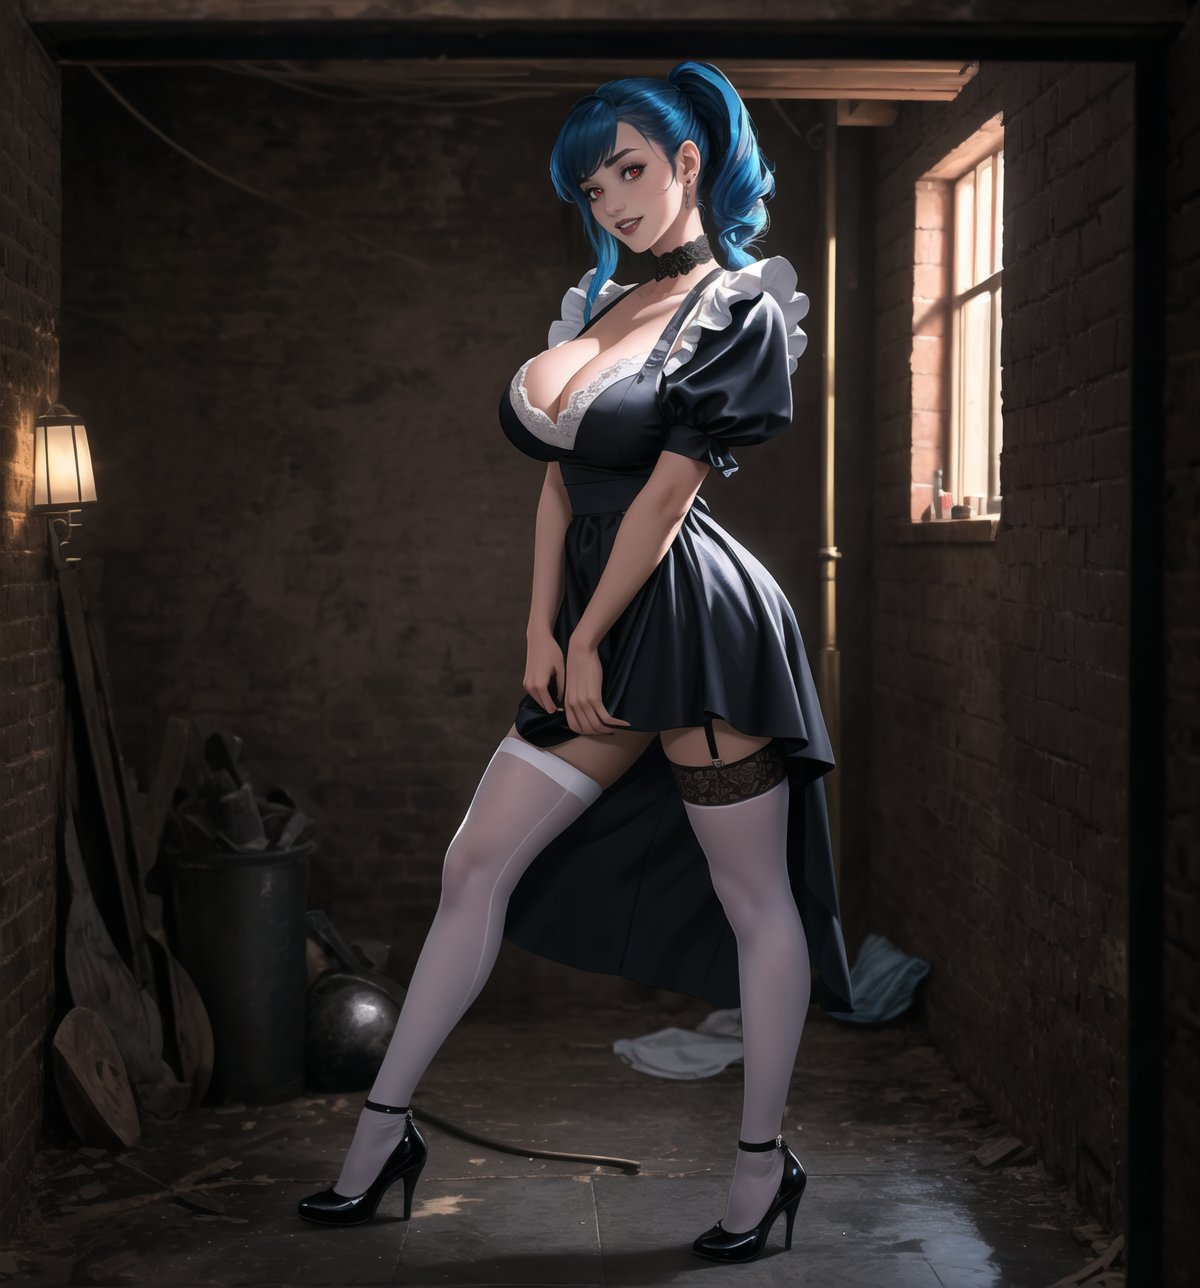 An ultra-detailed 4K masterpiece with gothic and horror styles, rendered in ultra-high resolution with realistic graphic details. | Daiana, a young 23-year-old woman with huge breasts, is dressed in a maid outfit, consisting of a tight black dress with white details, black stockings and black low-heeled shoes. She is also wearing a white apron, a white maid cap, silver heart earrings, and a black leather bracelet. Her blue hair is long and straight, falling over her shoulders in a half-up hairstyle. ((She has red eyes, which are looking straight at the viewer with a seductive smile, showing her shiny white teeth)). It is located in a macabre destroyed and filthy house, with rock, concrete and wooden structures. The place is poorly lit, with pipes and machines scattered across the floor. The atmosphere is creepy and uncomfortable, with ominous shadows moving through the hallways and strange sounds echoing through the building. | The image highlights Daiana's sensual figure and the architectural elements of the house. The rock, concrete and wooden structures, along with the pipes and machines, create a gothic and horror environment. Dim, intermittent lights illuminate the scene, creating eerie shadows and highlighting the details of the scene. | Soft, shadowy lighting effects create a tense, fear-filled atmosphere, while detailed textures on skin and clothing add realism to the image. | A frightening and seductive scene of a young woman dressed as a maid in a macabre destroyed house, exploring themes of horror, fear and seduction. | (((The image reveals a full-body shot as Daiana assumes a sensual pose, engagingly leaning against a structure within the scene in an exciting manner. She takes on a sensual pose as she interacts, boldly leaning on a structure, leaning back and boldly throwing herself onto the structure, reclining back in an exhilarating way.))). | ((((full-body shot)))), ((perfect pose)), ((perfect arms):1.2), ((perfect limbs, perfect fingers, better hands, perfect hands, hands)), ((perfect legs, perfect feet):1.2), Daiana has (((huge breasts))), ((perfect design)), ((perfect composition)), ((very detailed scene, very detailed background, perfect layout, correct imperfections)), Enhance, Ultra details, More Detail, ((poakl))